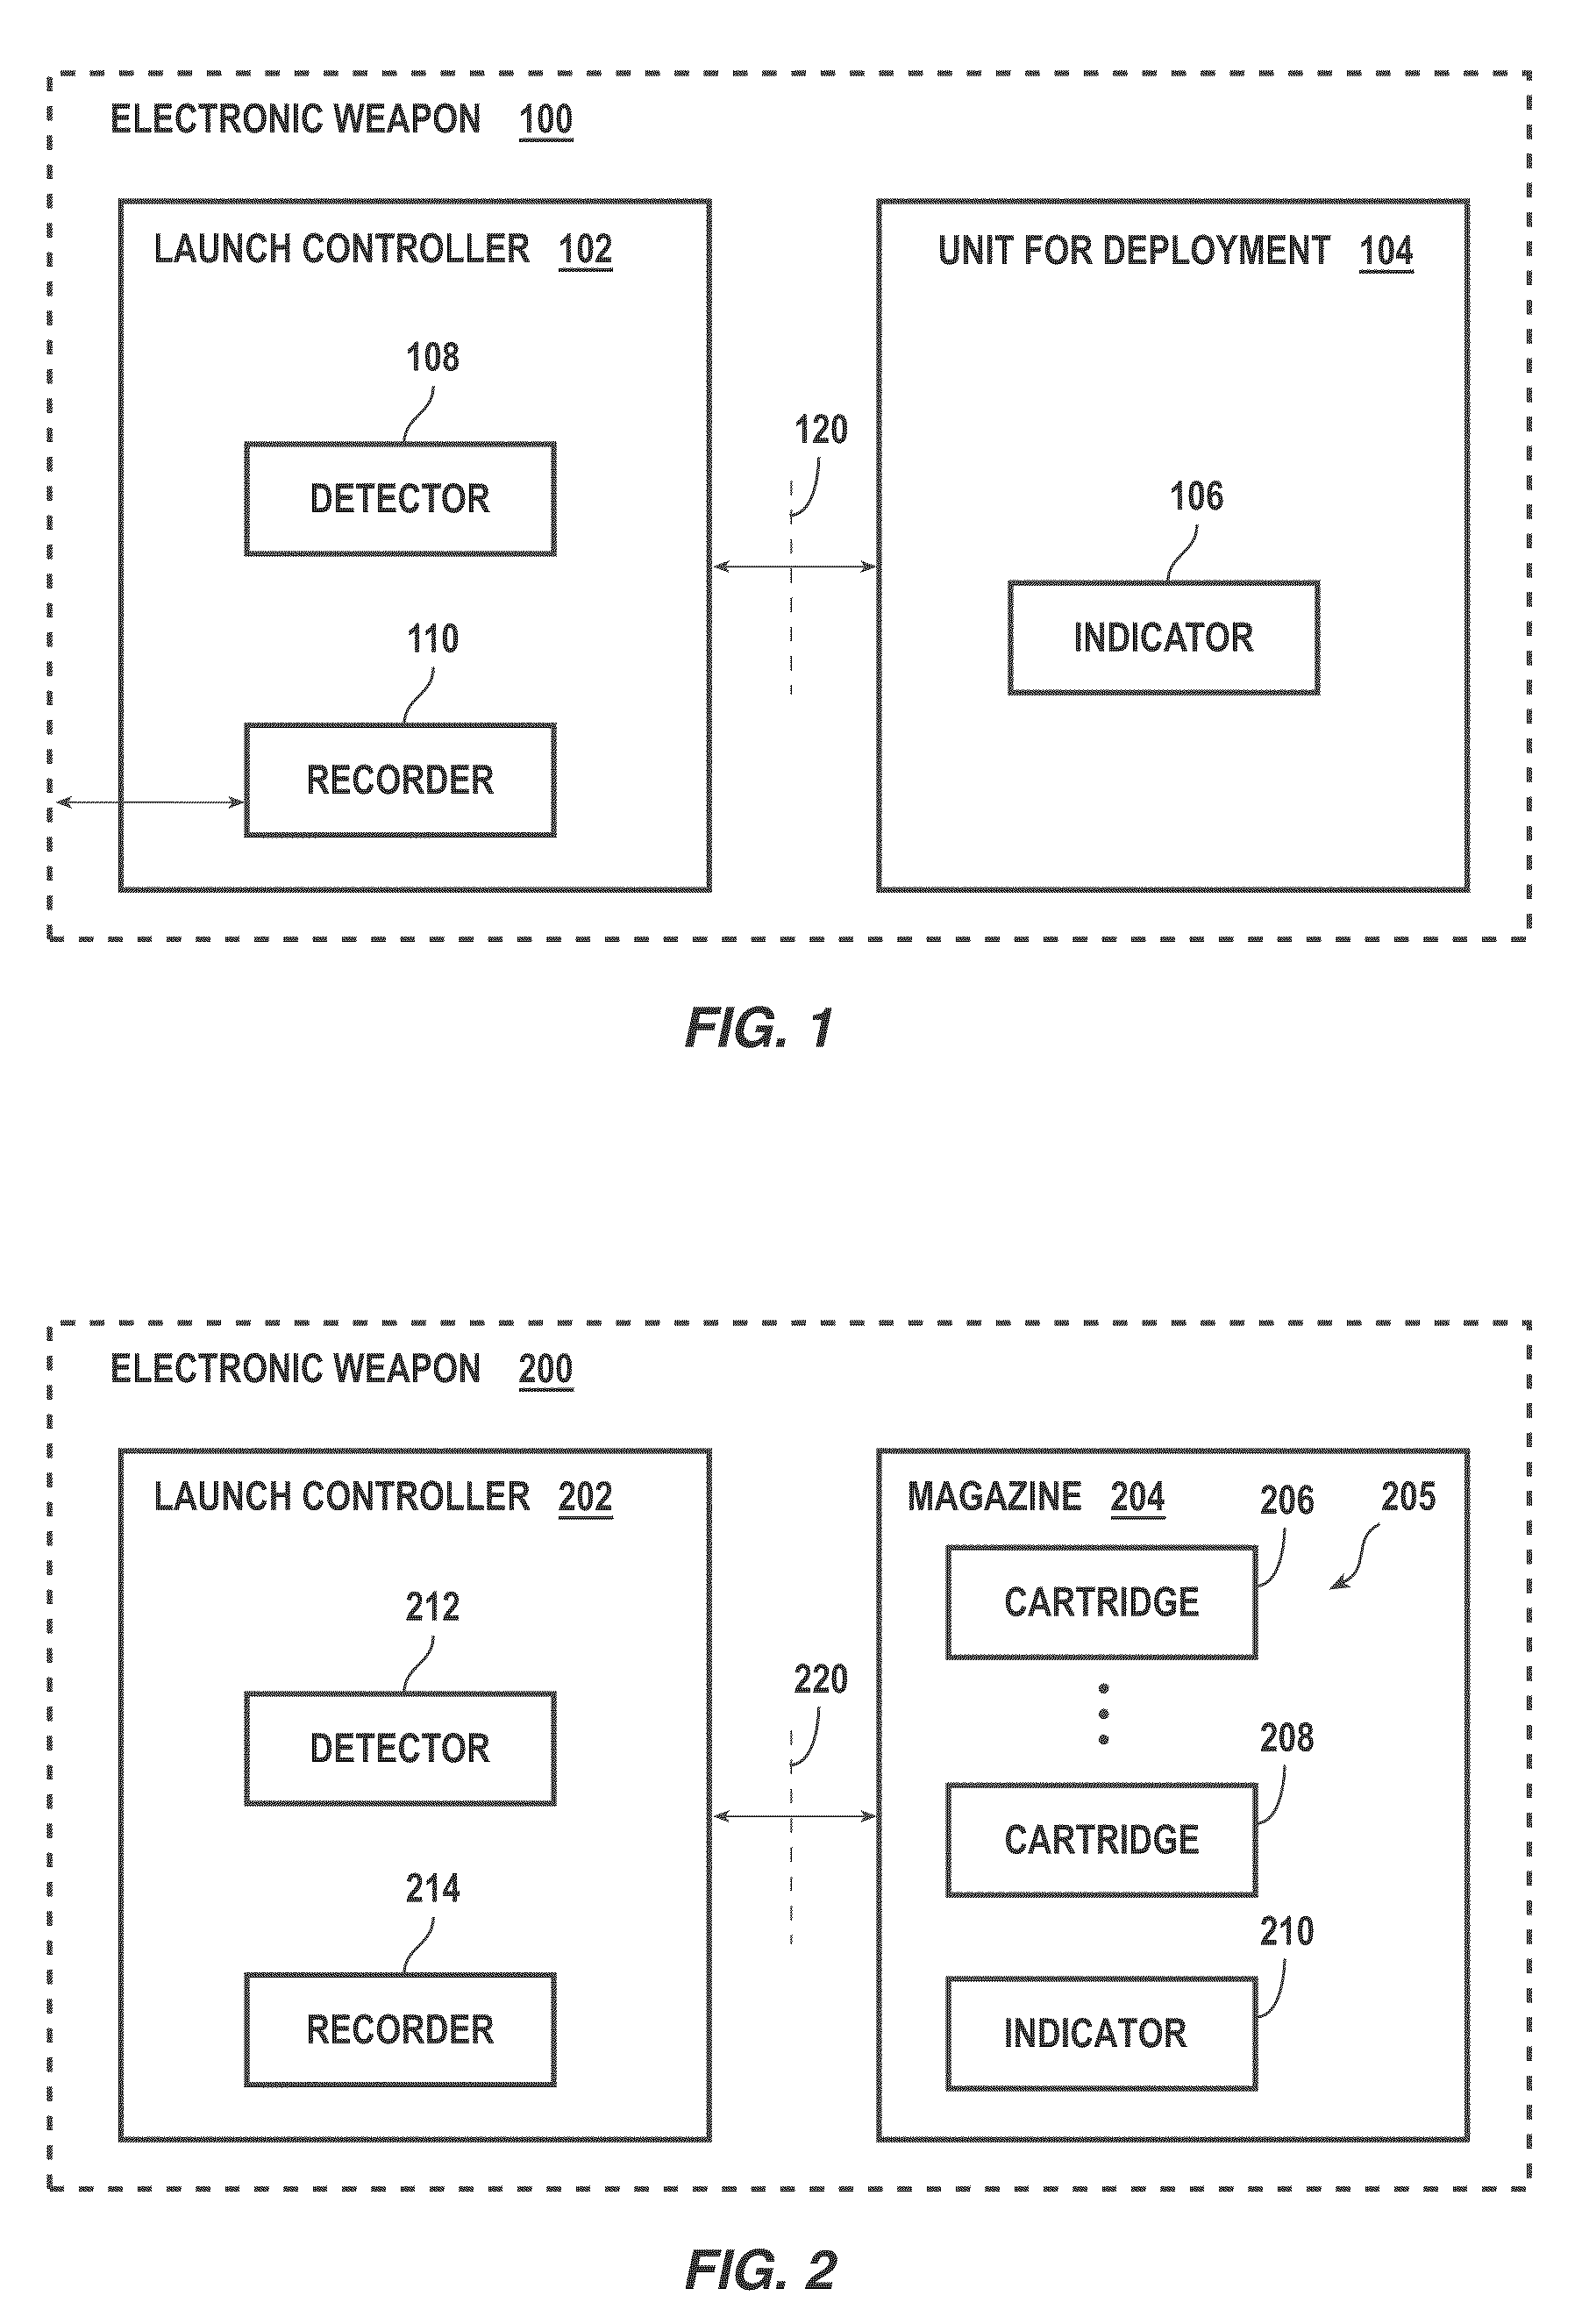 Systems and methods for electronic weaponry that detects properties of a unit for deployment